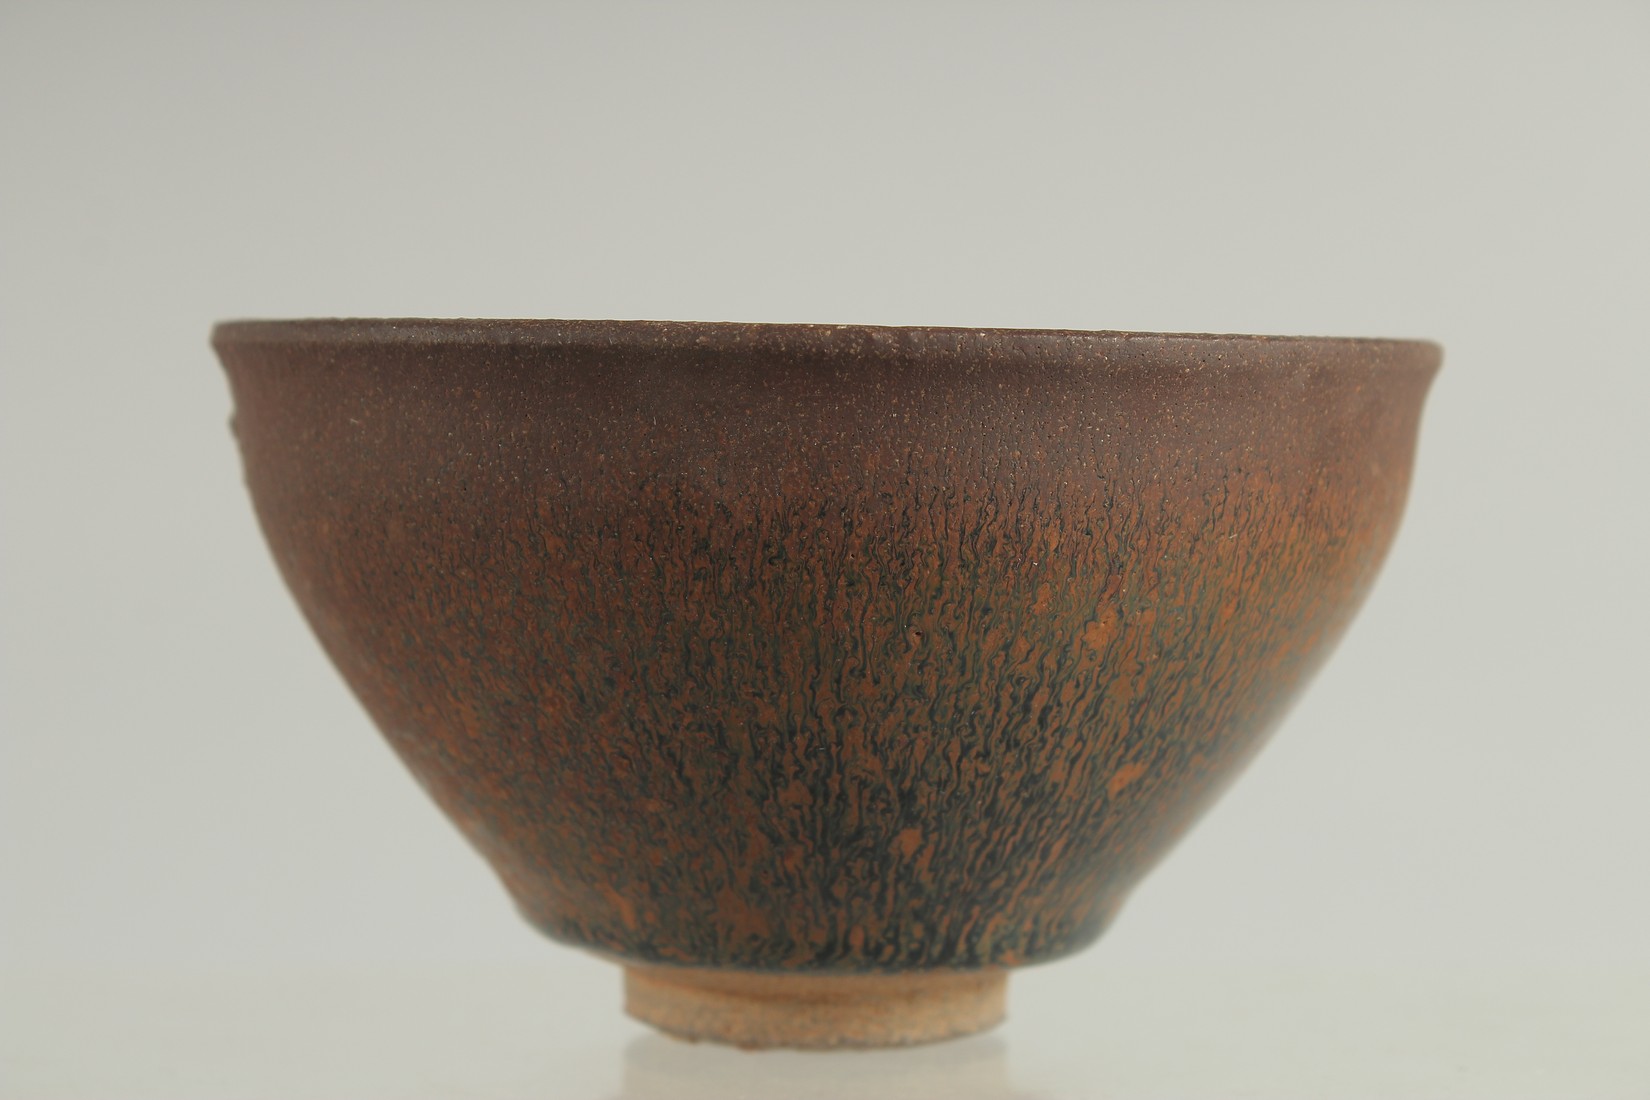 A CHINESE JIAN WARE BOWL, with hare's fur glaze, 12.5cm diameter. - Image 3 of 5